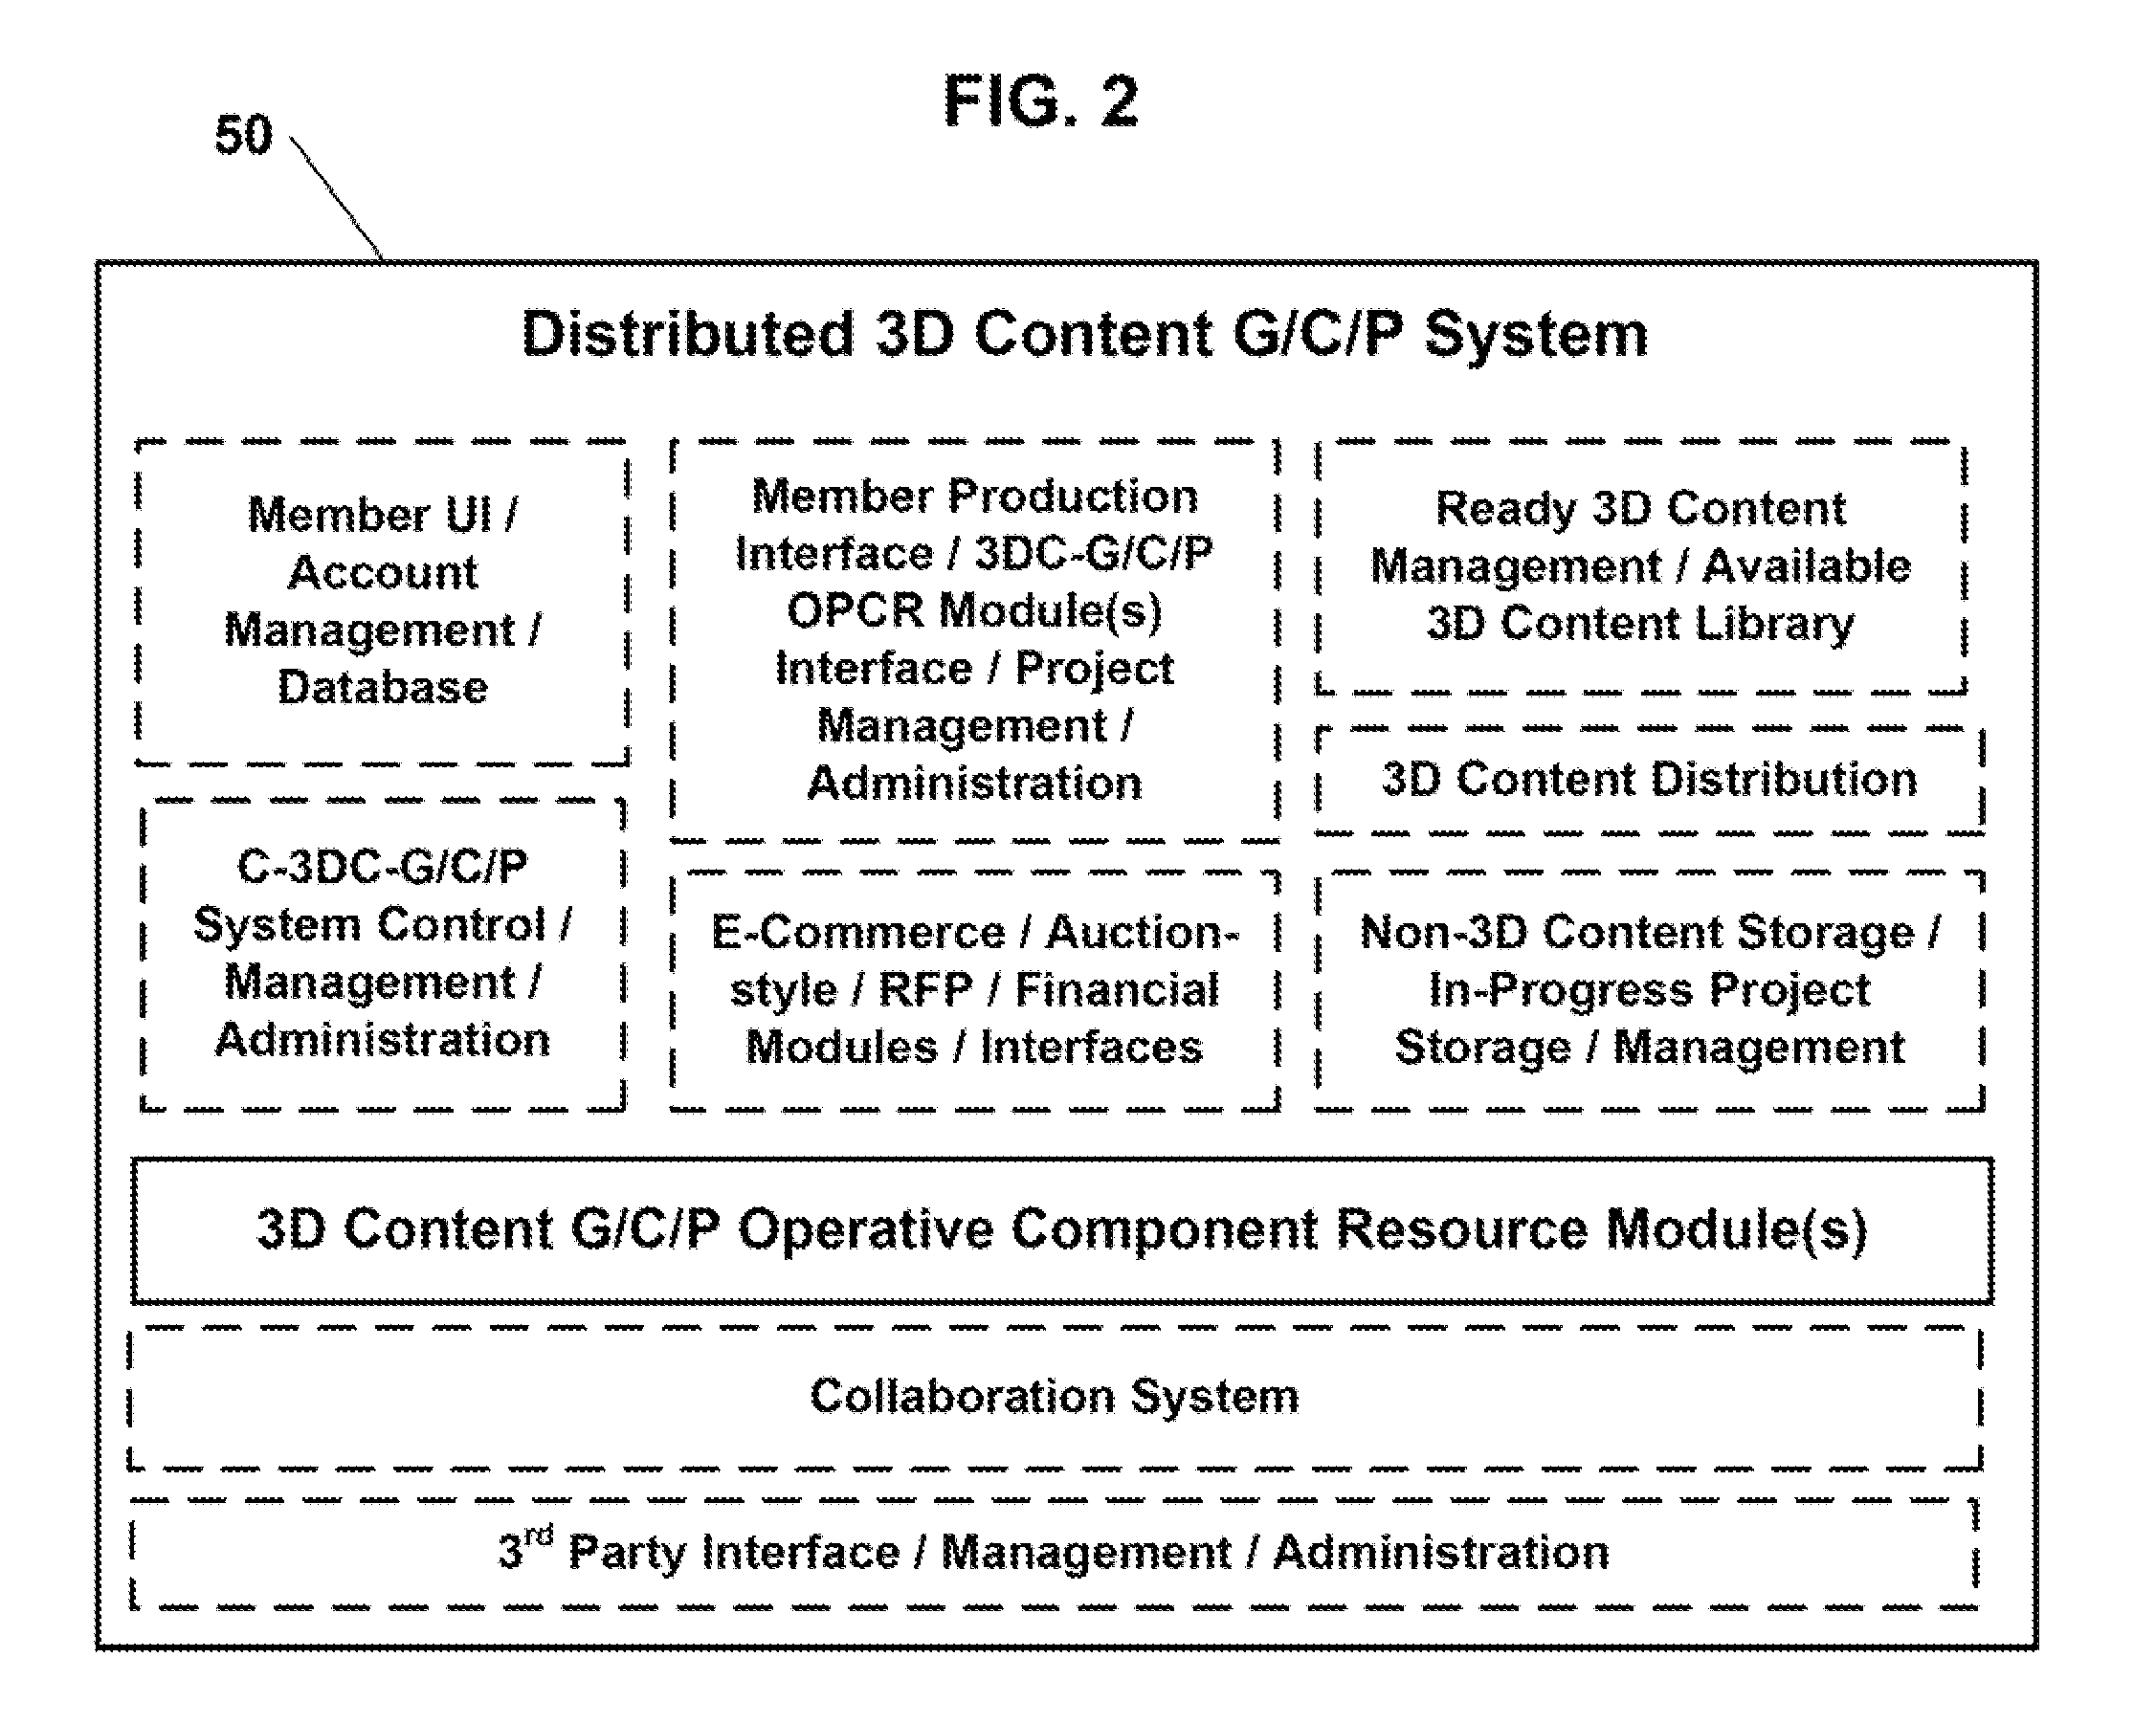 System and method for collaborative distributed generation, conversion, quality and processing optimization, enhancement, correction, mastering, and other advantageous processing of three dimensional media content